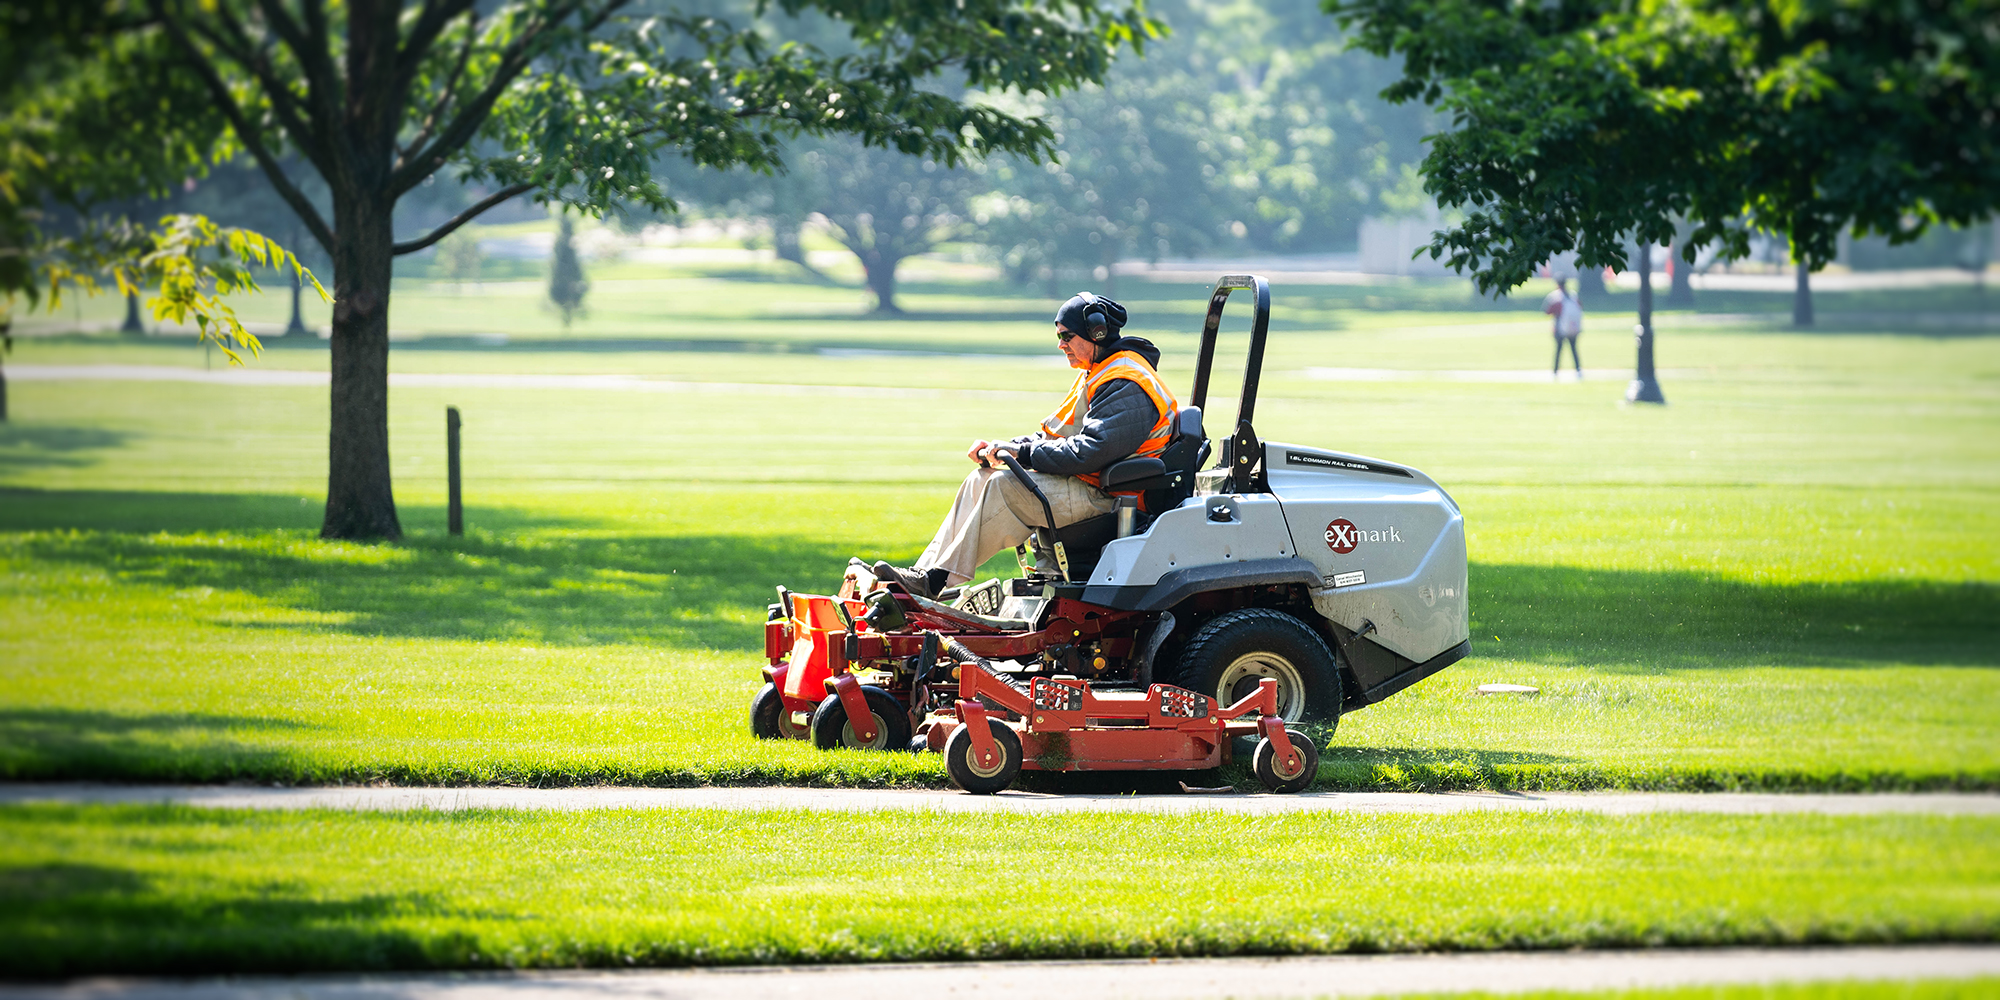 FOD operations staff on a riding mower on the oval